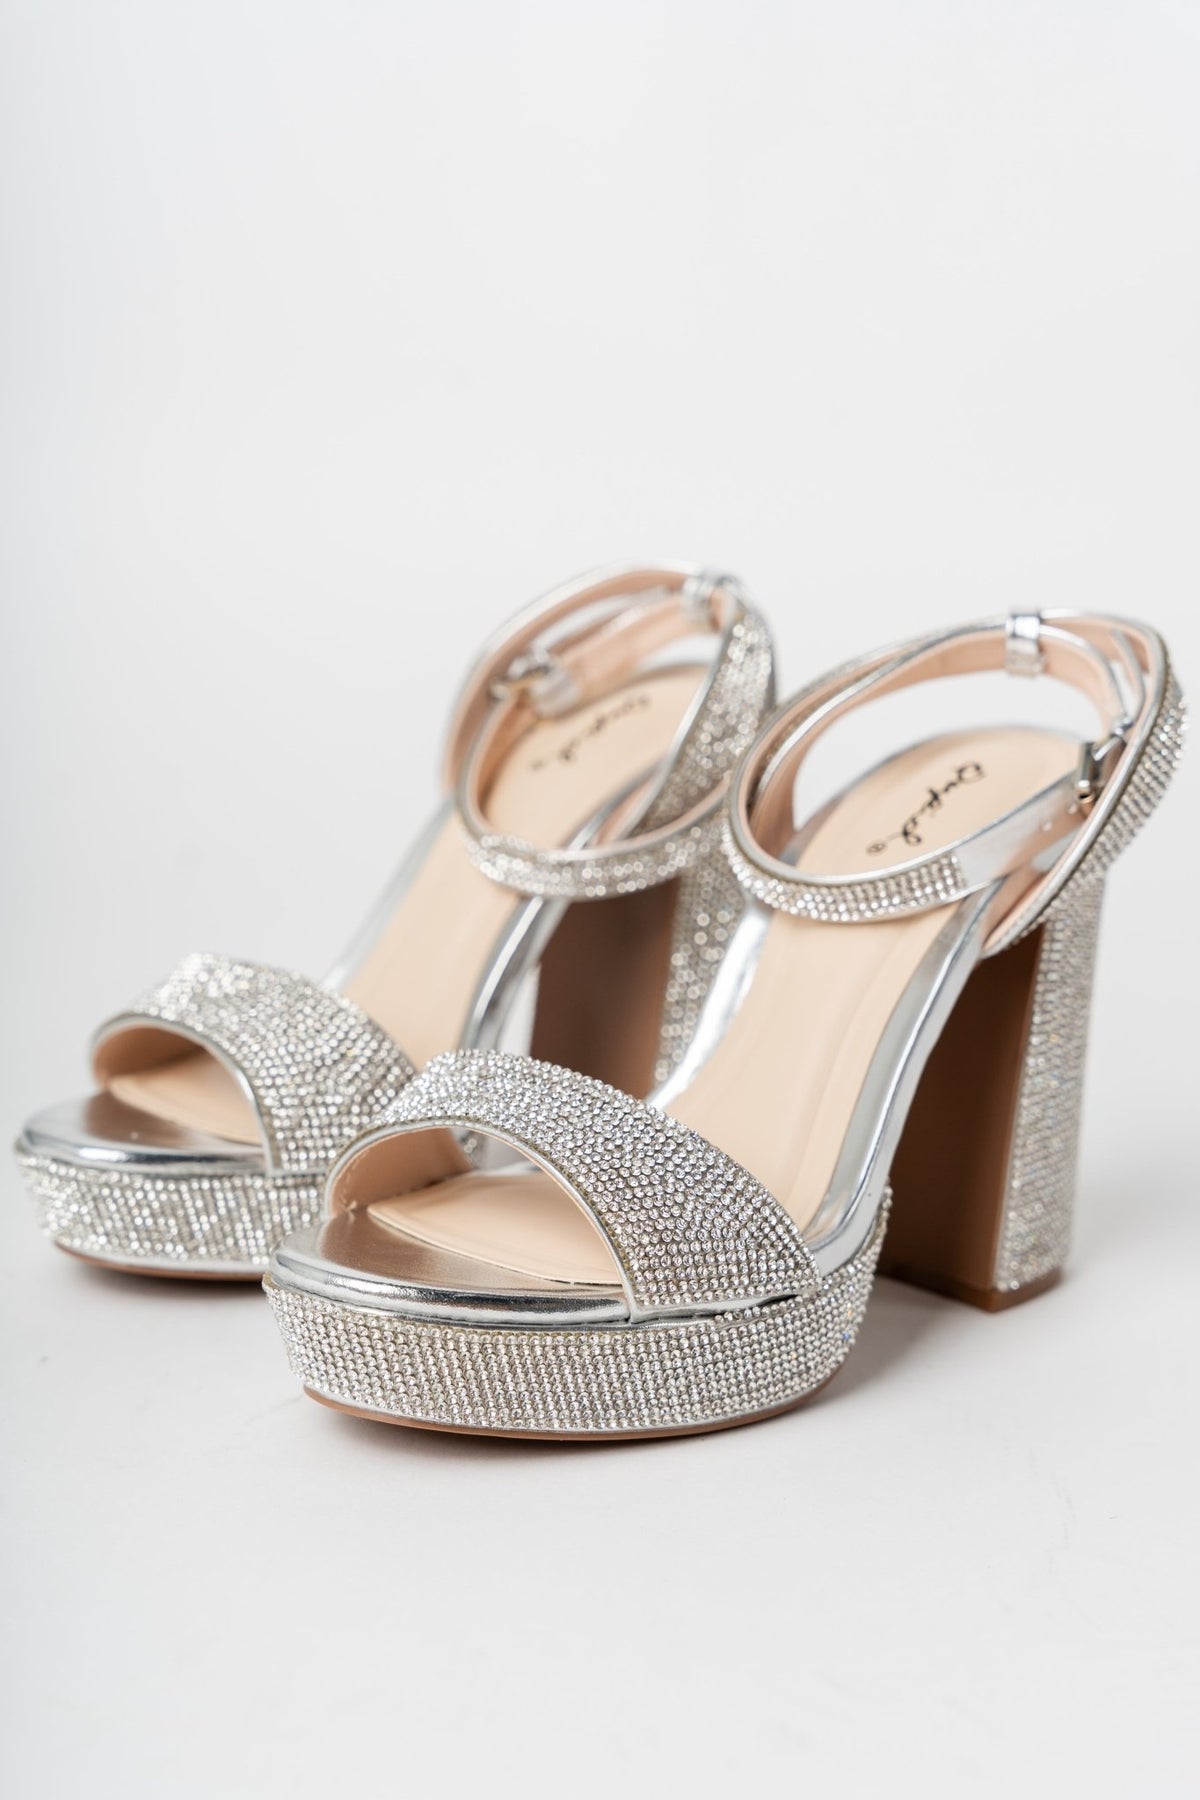 Lighting rhinestone chunky heel silver - Cute shoes - Trendy Shoes at Lush Fashion Lounge Boutique in Oklahoma City